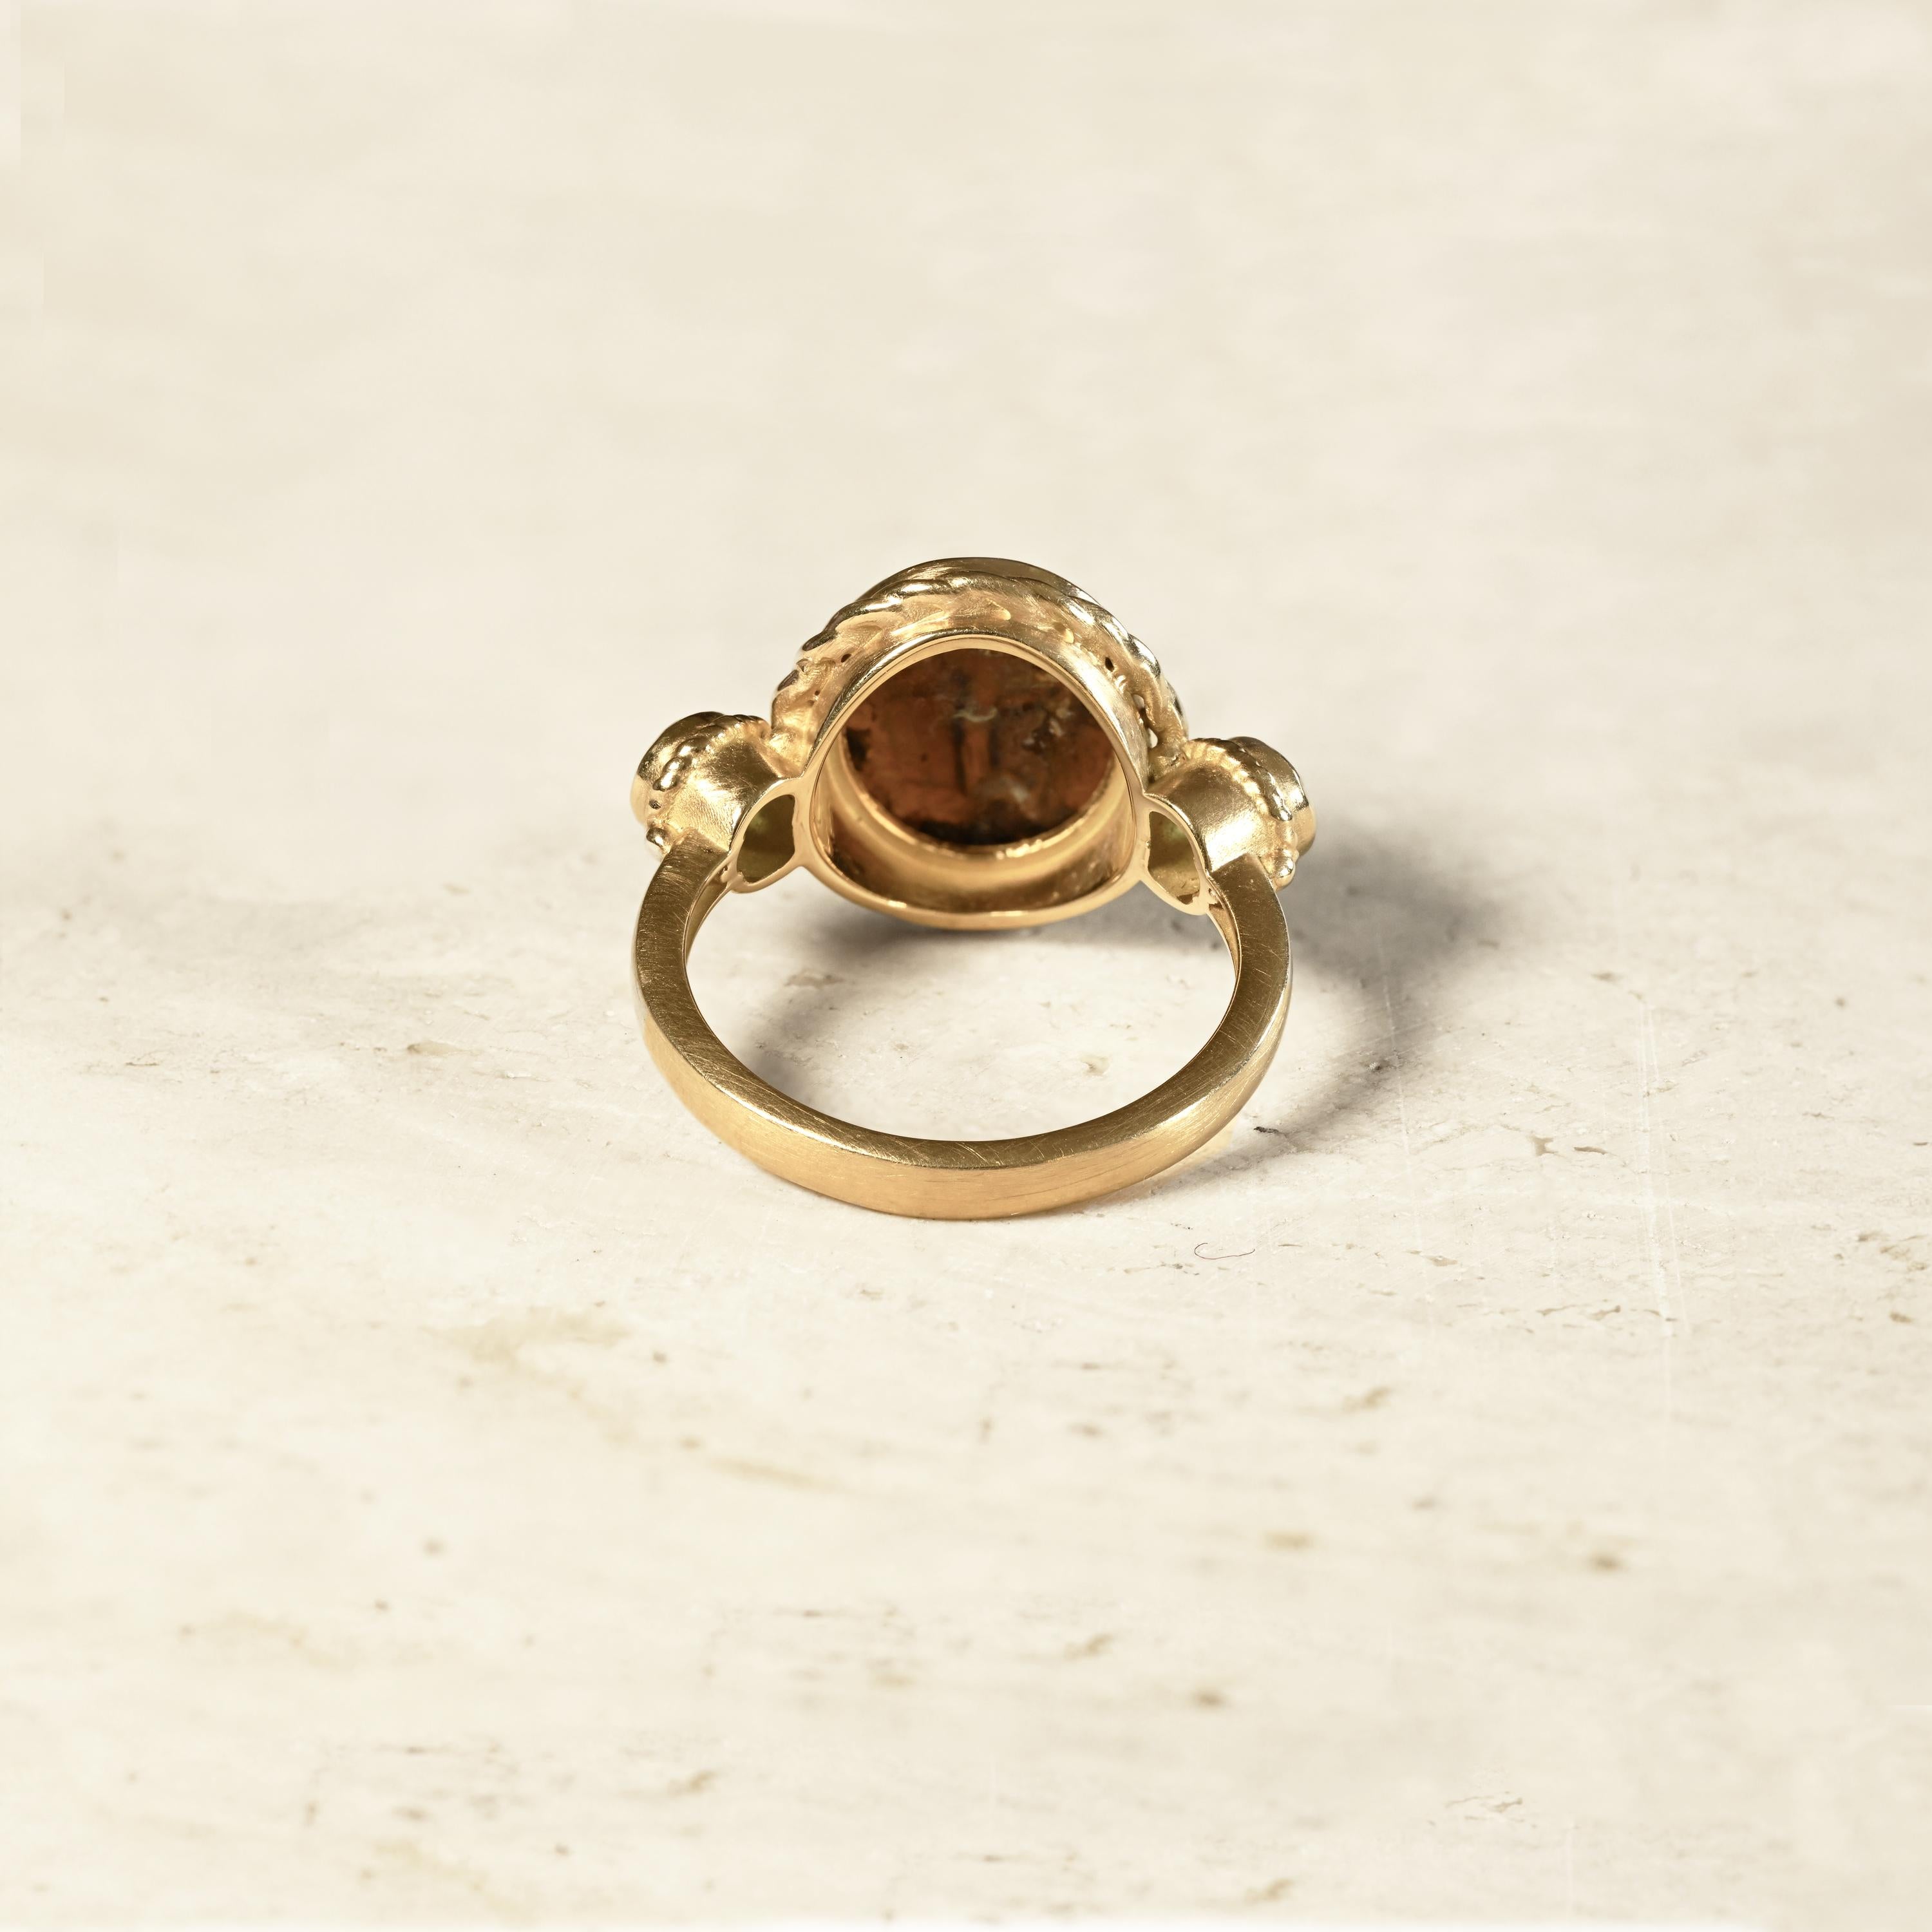 Roman Carnelian Iintaglio 1ST-2ND Cent. AD 18 KT Gold Ring Depicting Demeter For Sale 2